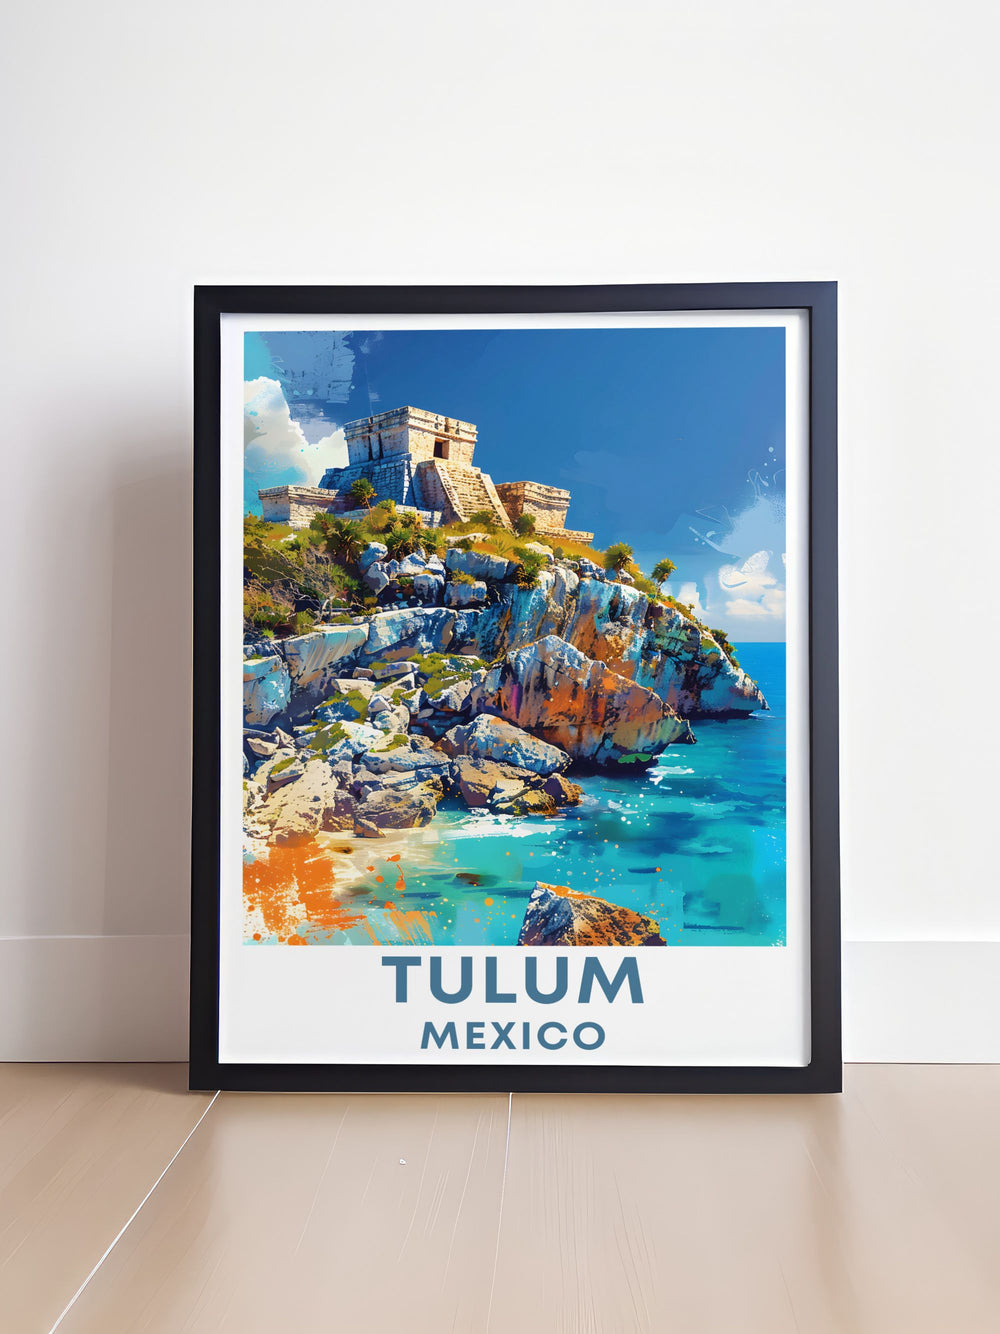 Highlighting the serene beauty of Tulum, this poster features ancient Mayan ruins overlooking the turquoise sea, ideal for those who love coastal and historical destinations.